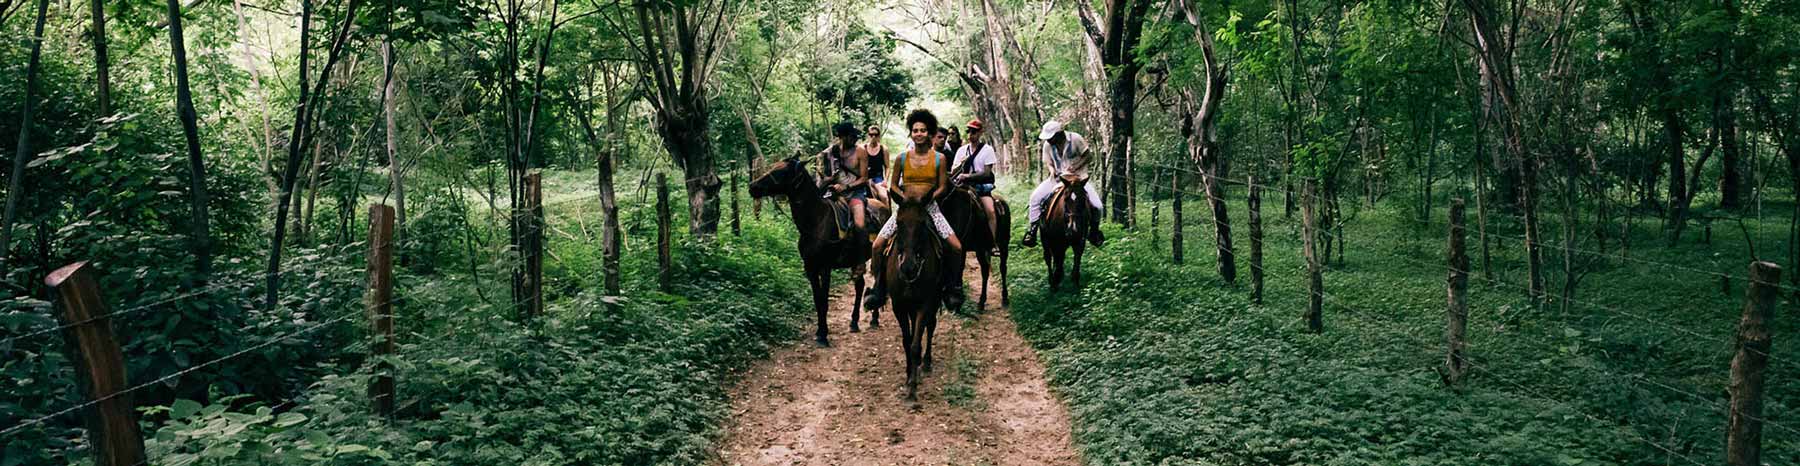 People on horseback riding through a tropical forest.